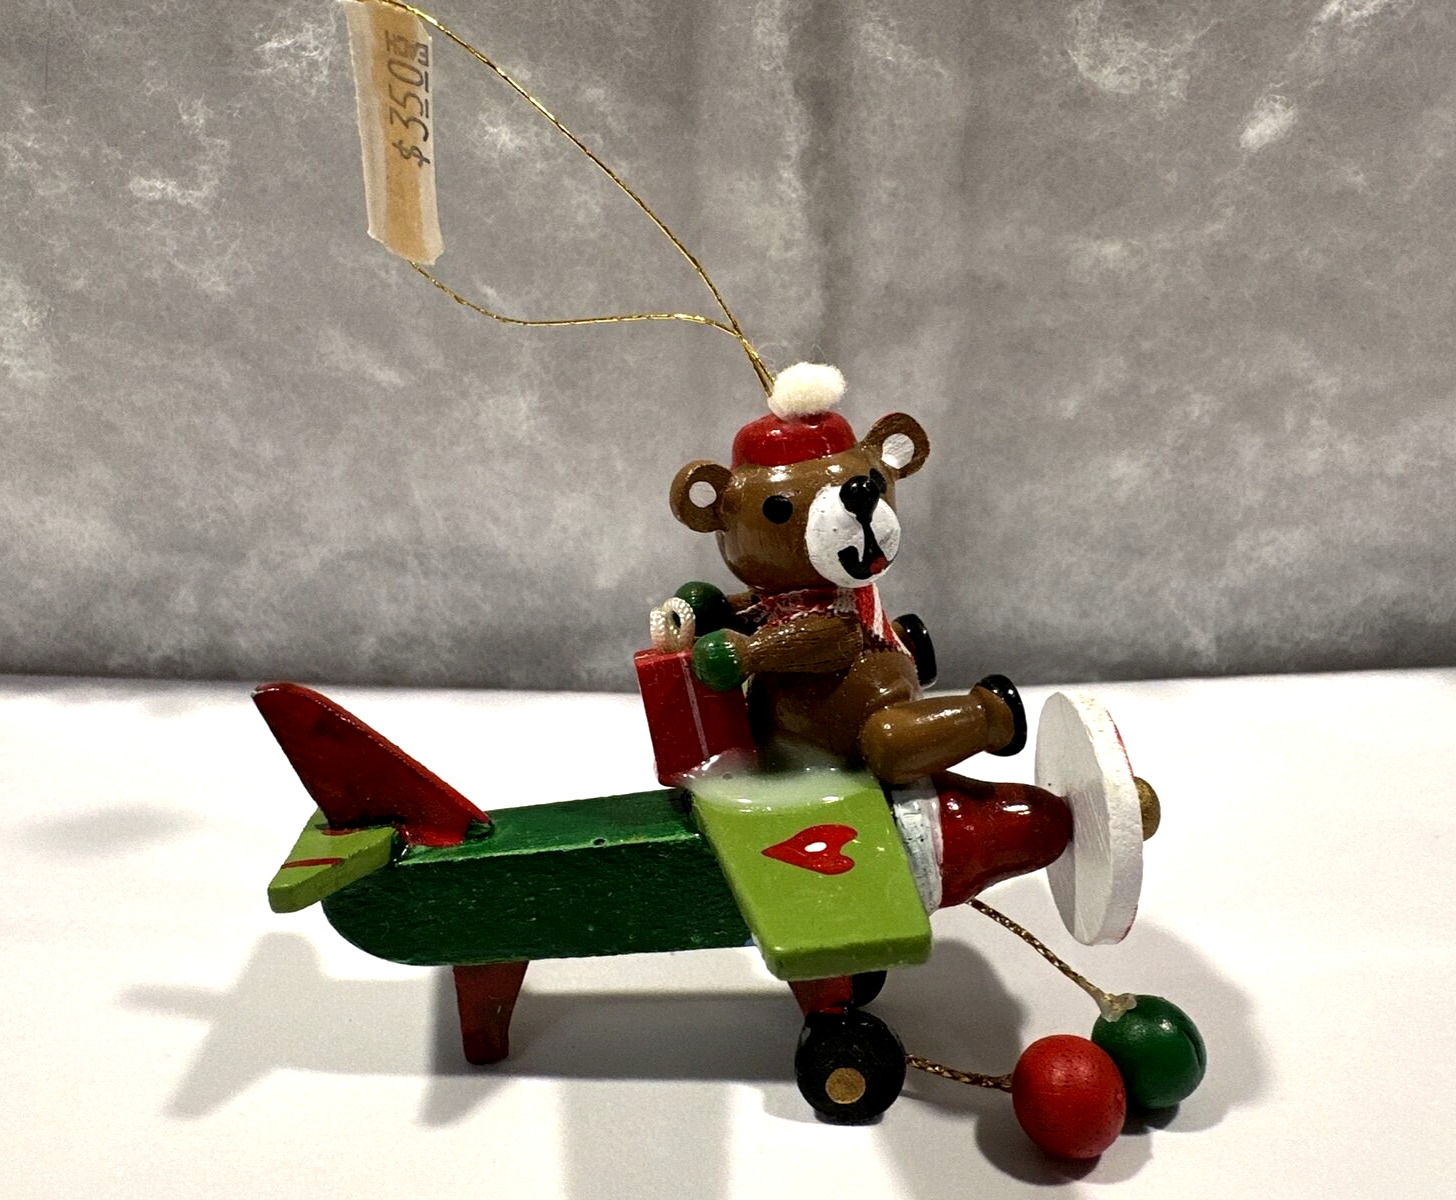 Vintage Wooden Airplane Ornament With Teddy Bear Delivering Christmas Presents